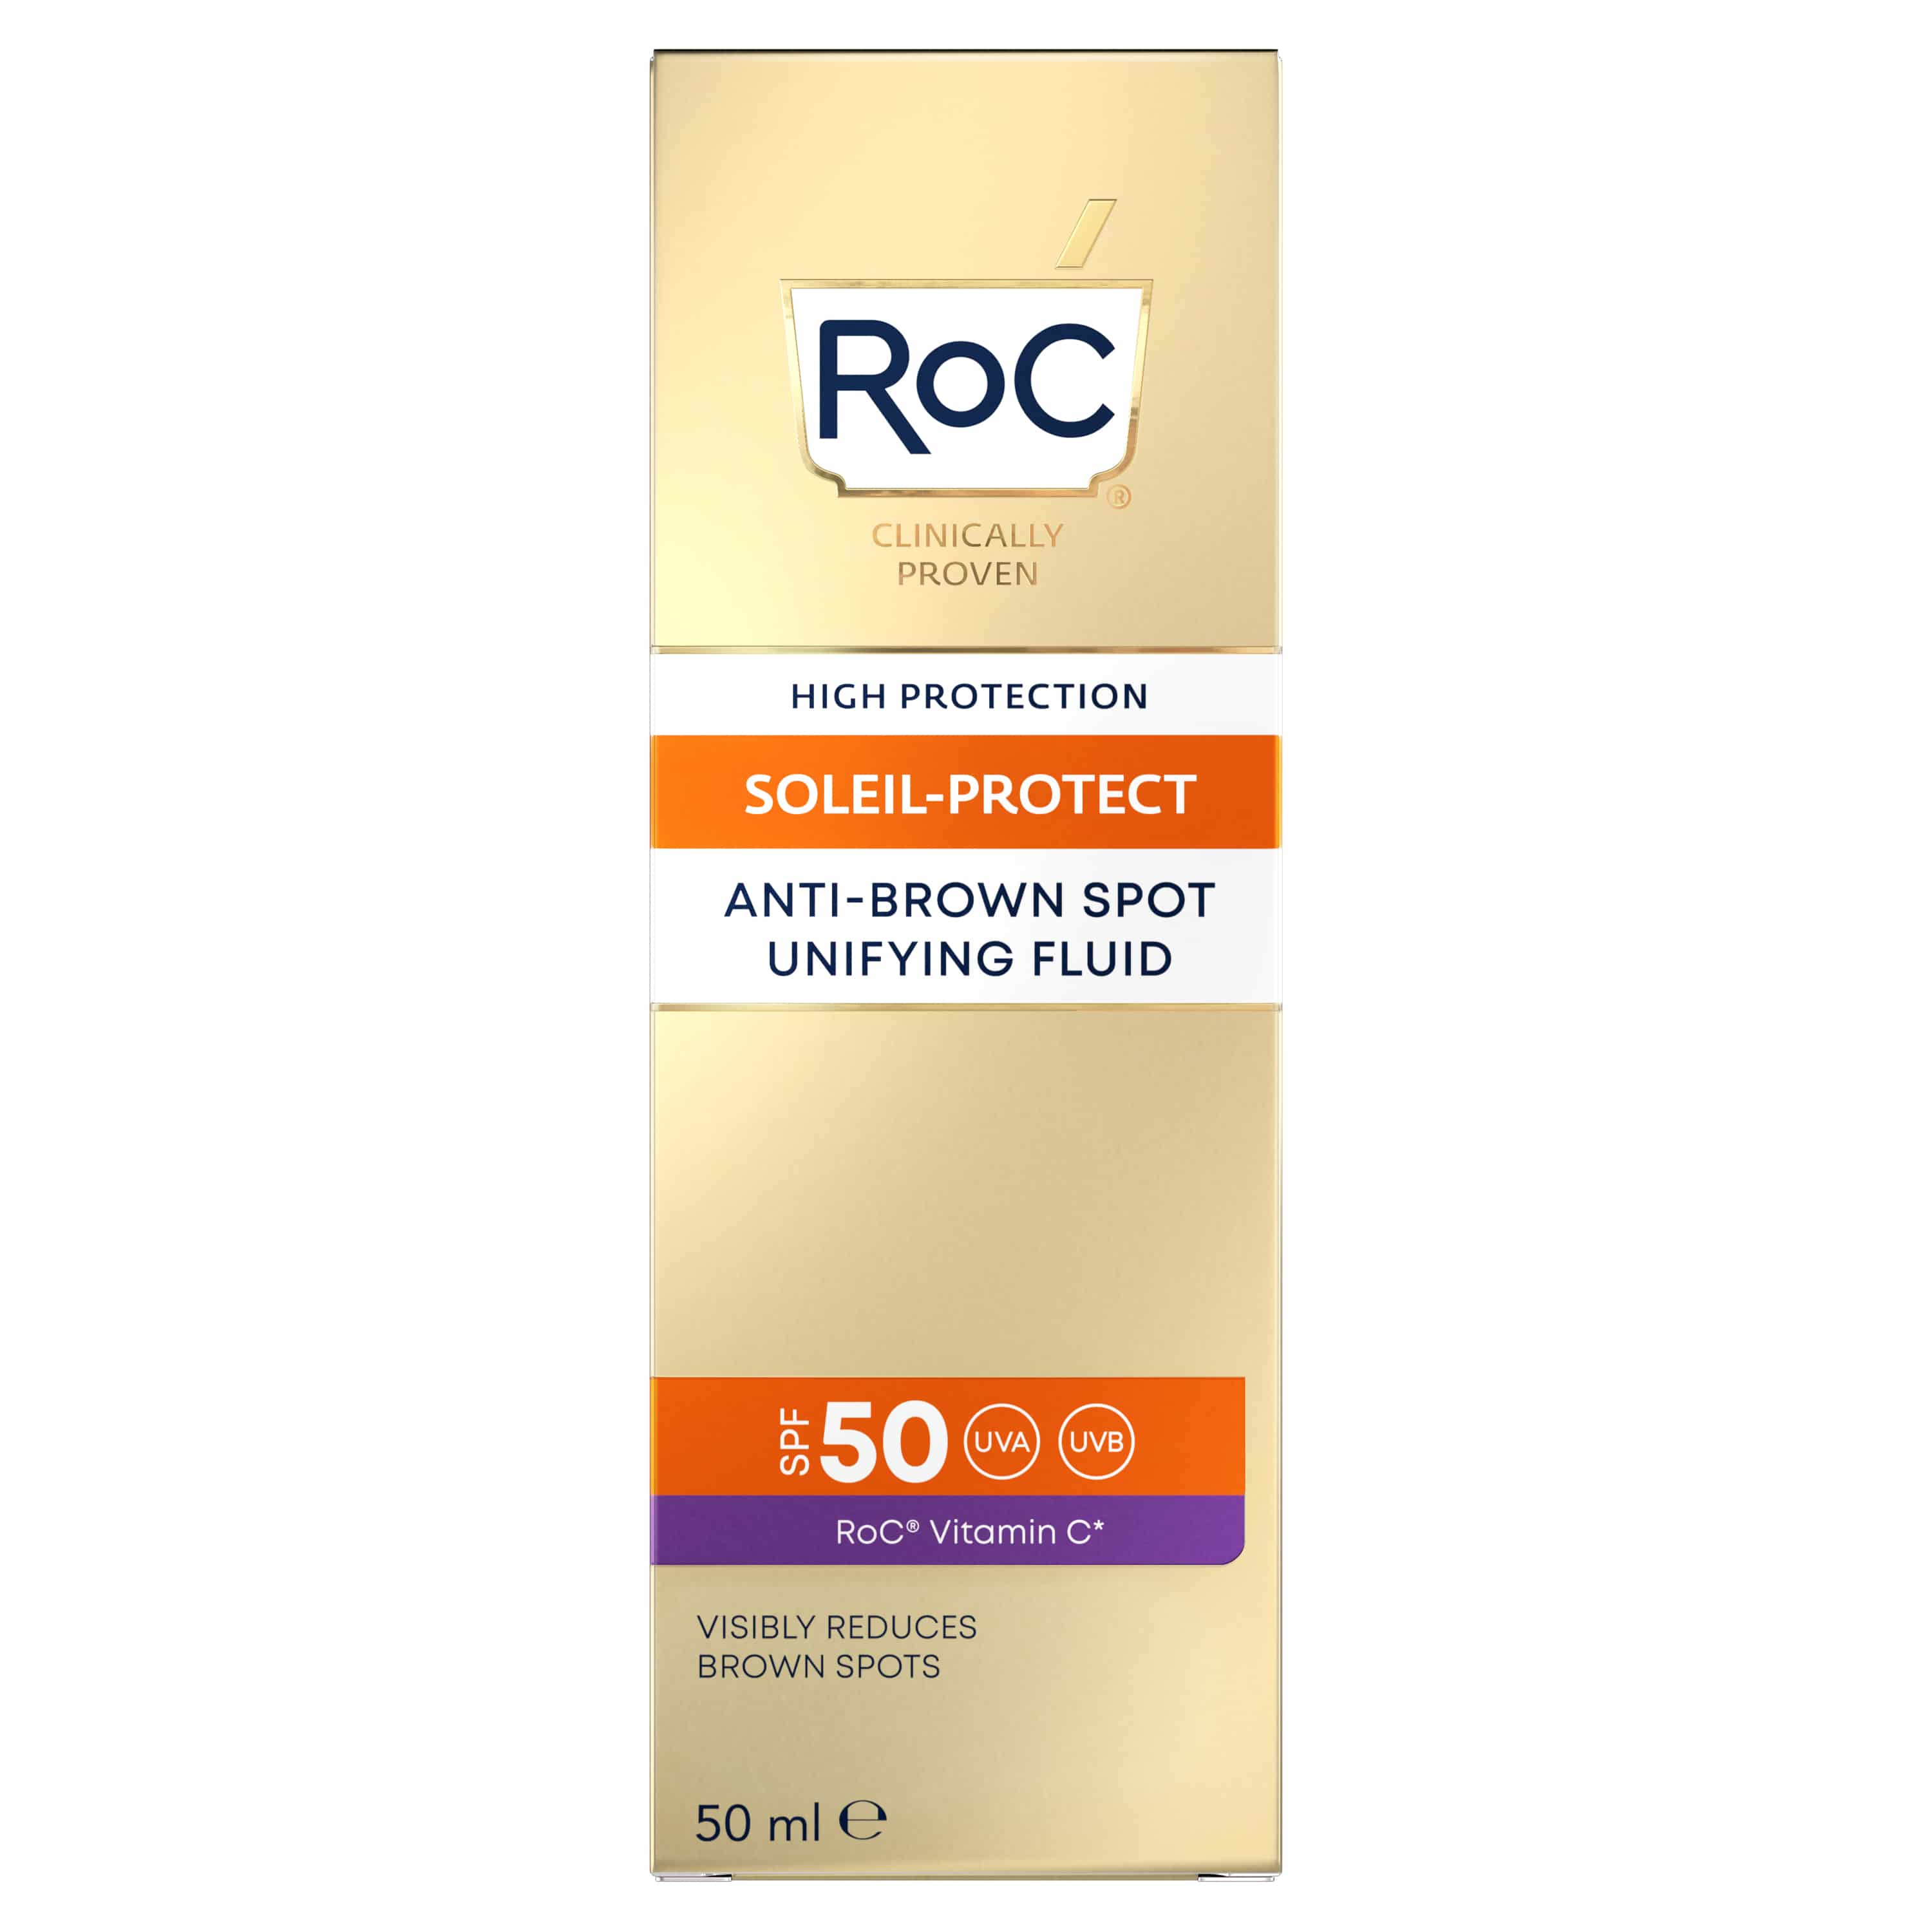 Roc Soleil-Protect Anti-Brown Spot Unifying Fluid SPF50+